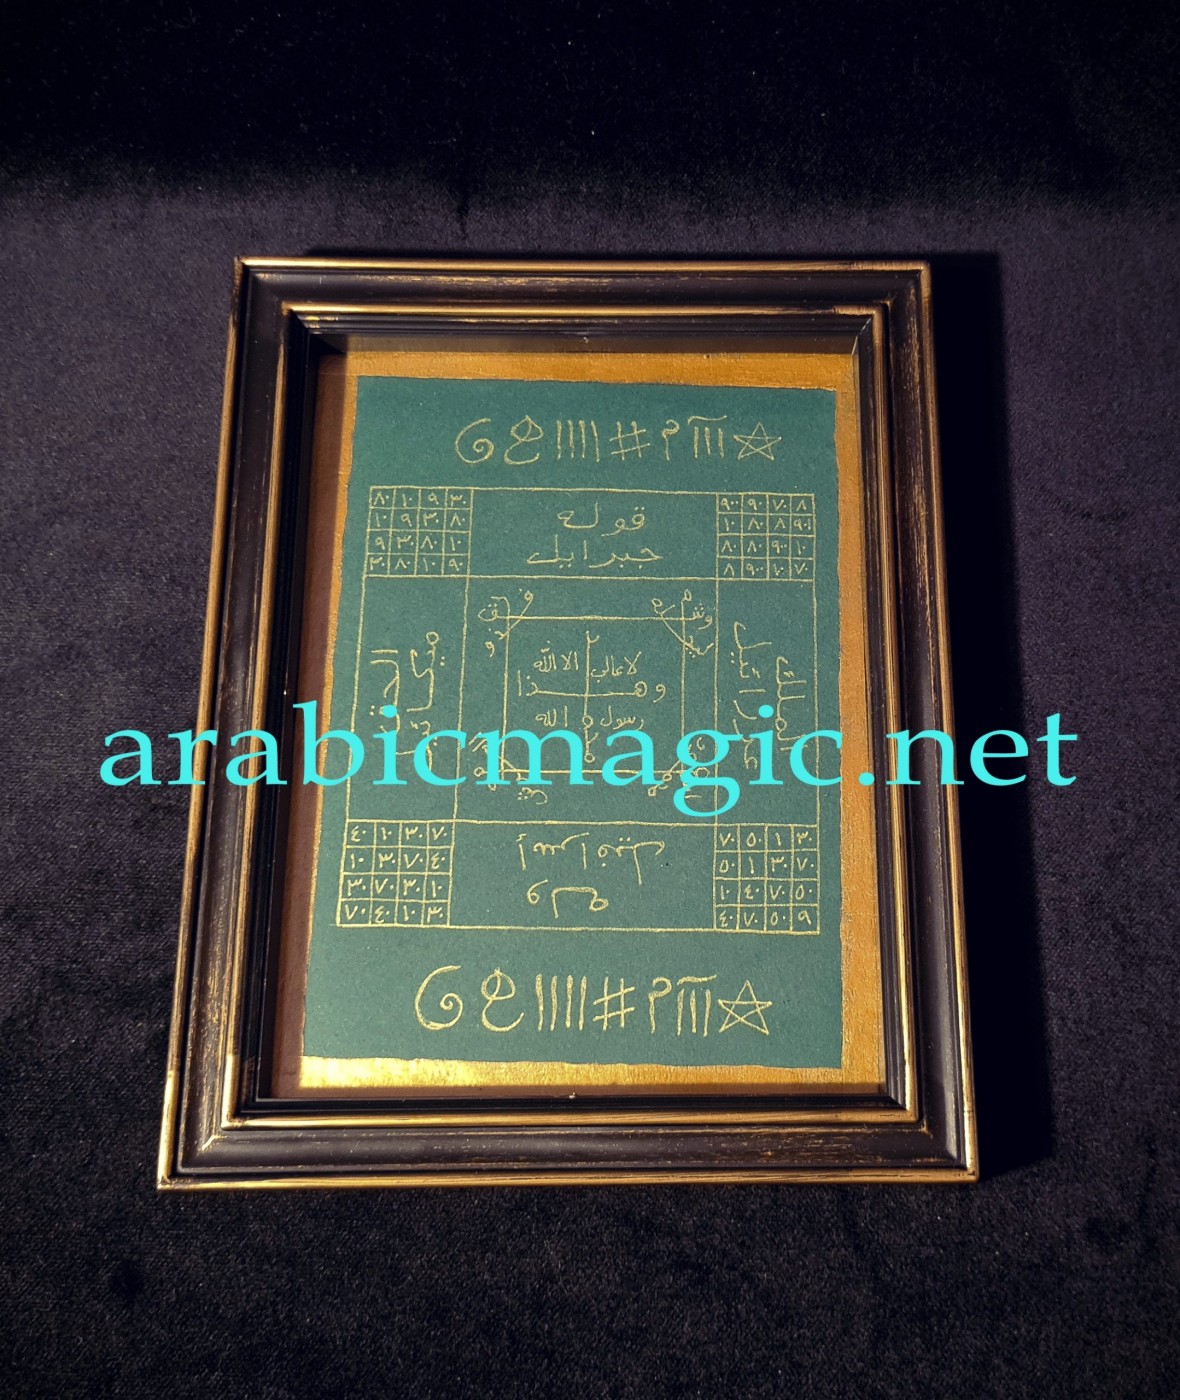 Arabic Magical Taweez For Home Protection - Arabic Home Protection Taweez/ Amulet Against Evil Spirits, Djinns, Demons, Black Magic, Evil Eyes and Curses